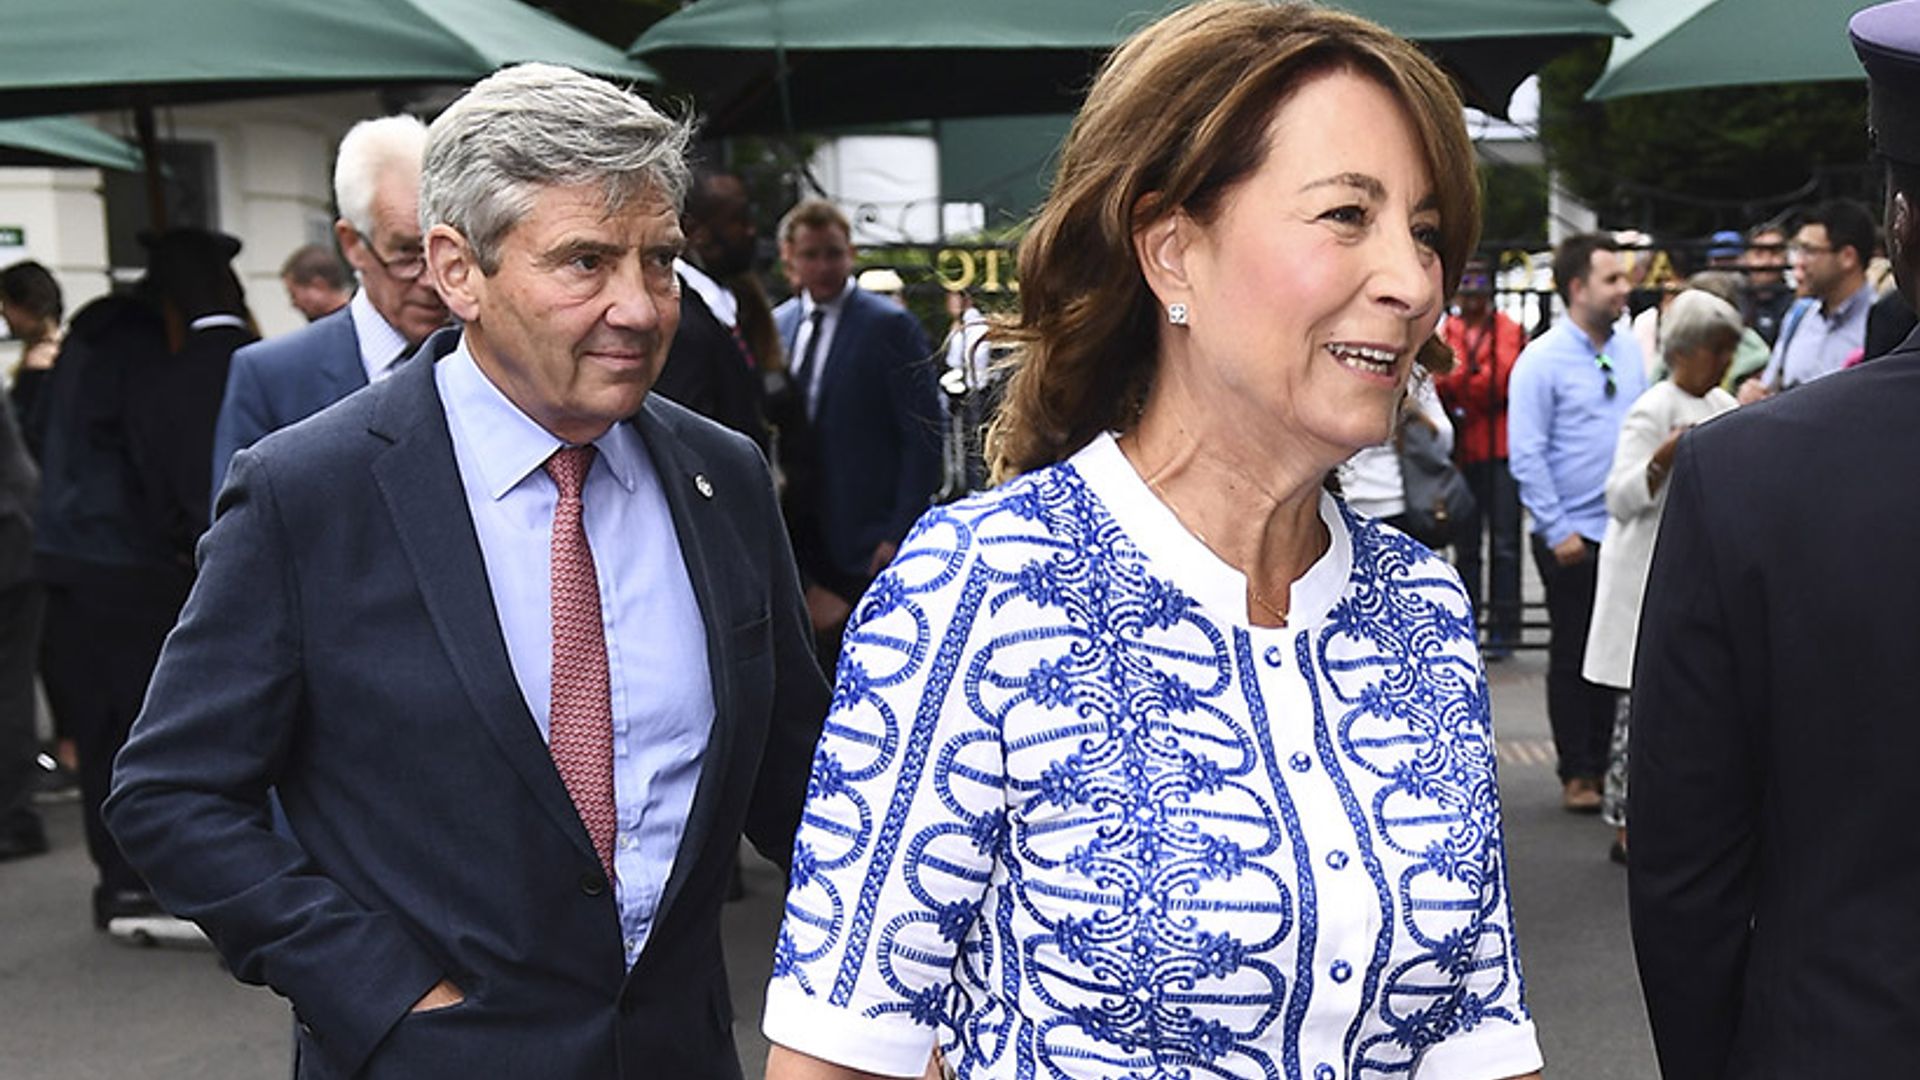 Carole Middleton copies Kate's £4,000 Alexander McQueen dress for Wimbledon outing